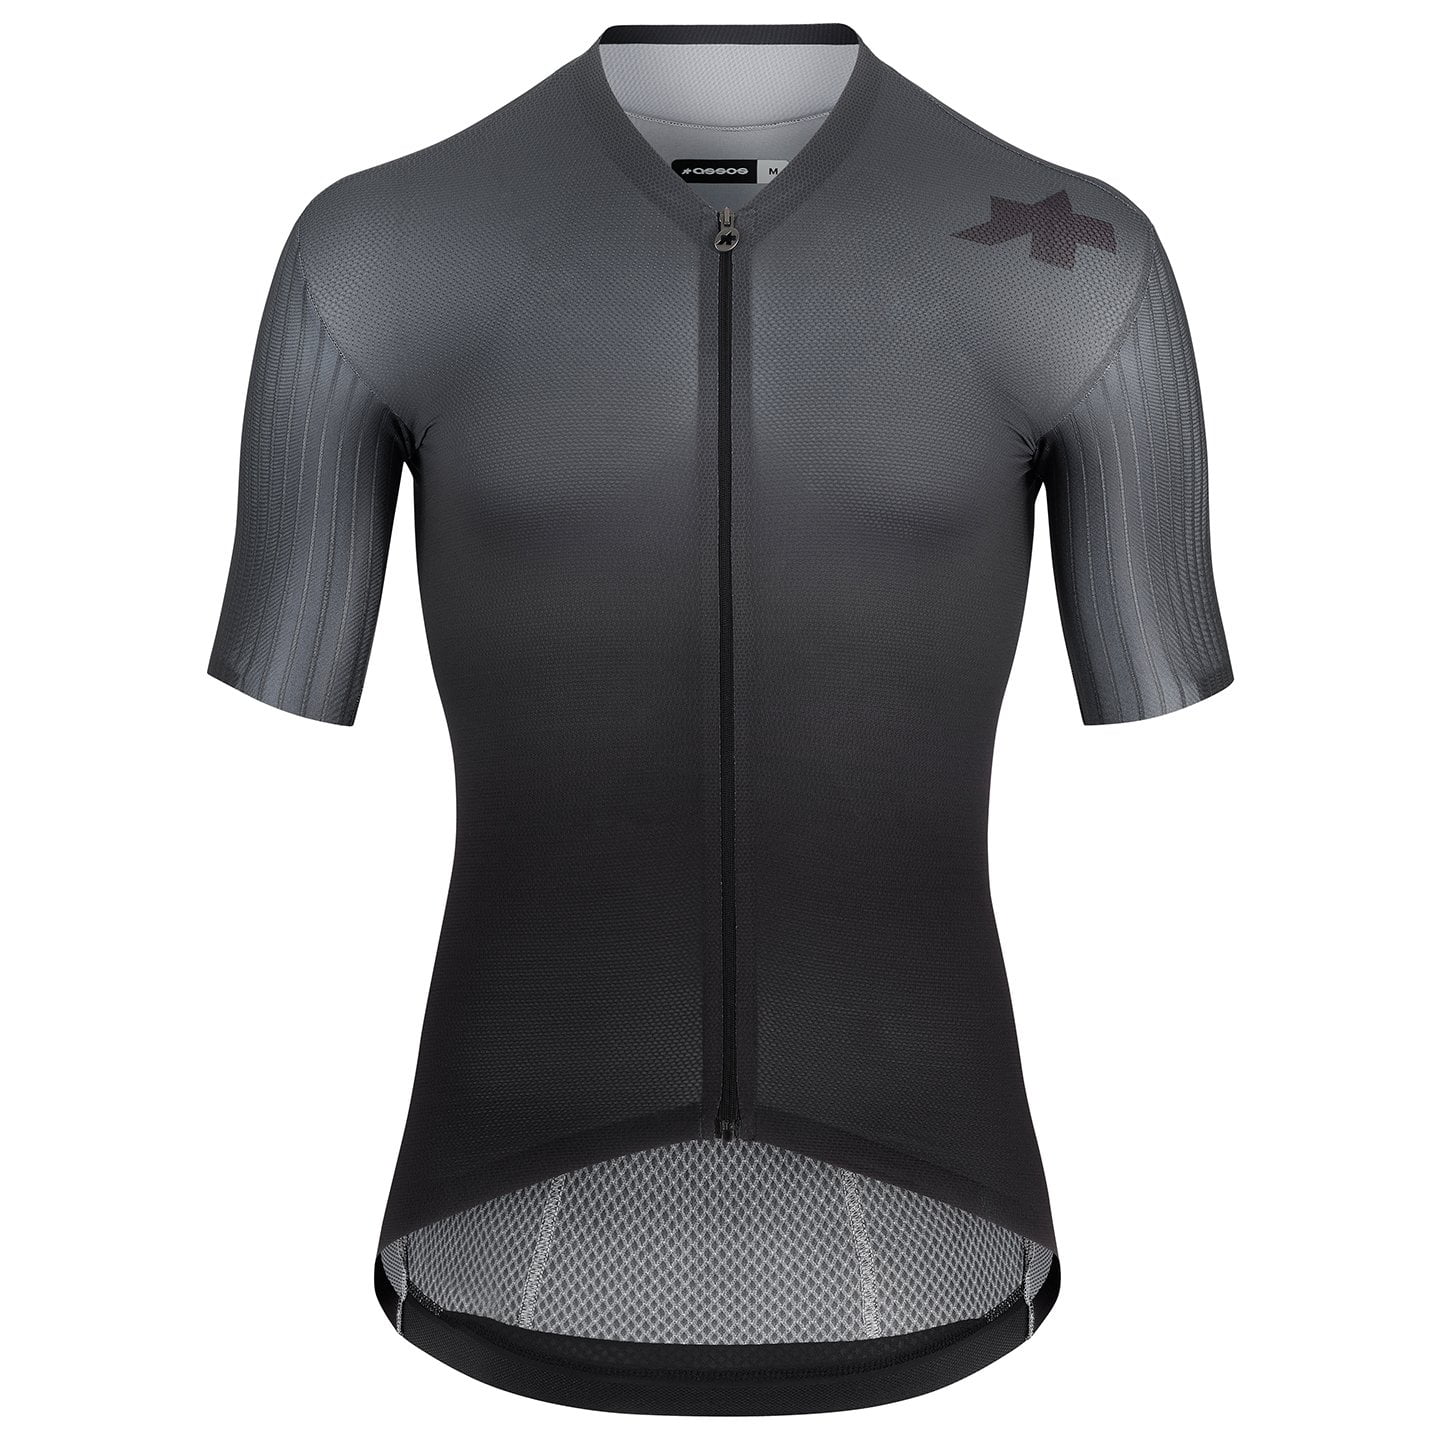 ASSOS Equipe RS S11 Short Sleeve Jersey, for men, size M, Cycling jersey, Cycling clothing